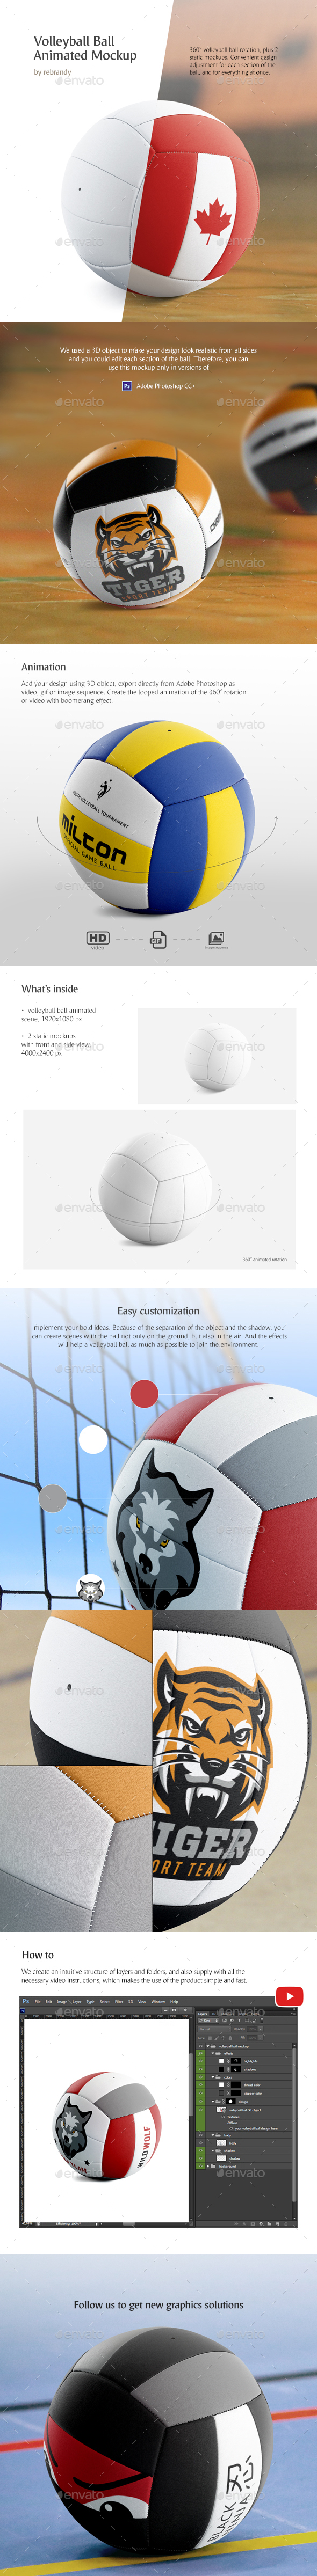 Download Volleyball Ball Animated Mockup Graphic Free Download - Nulled Wordpress Plugin, Themes, PHP Script